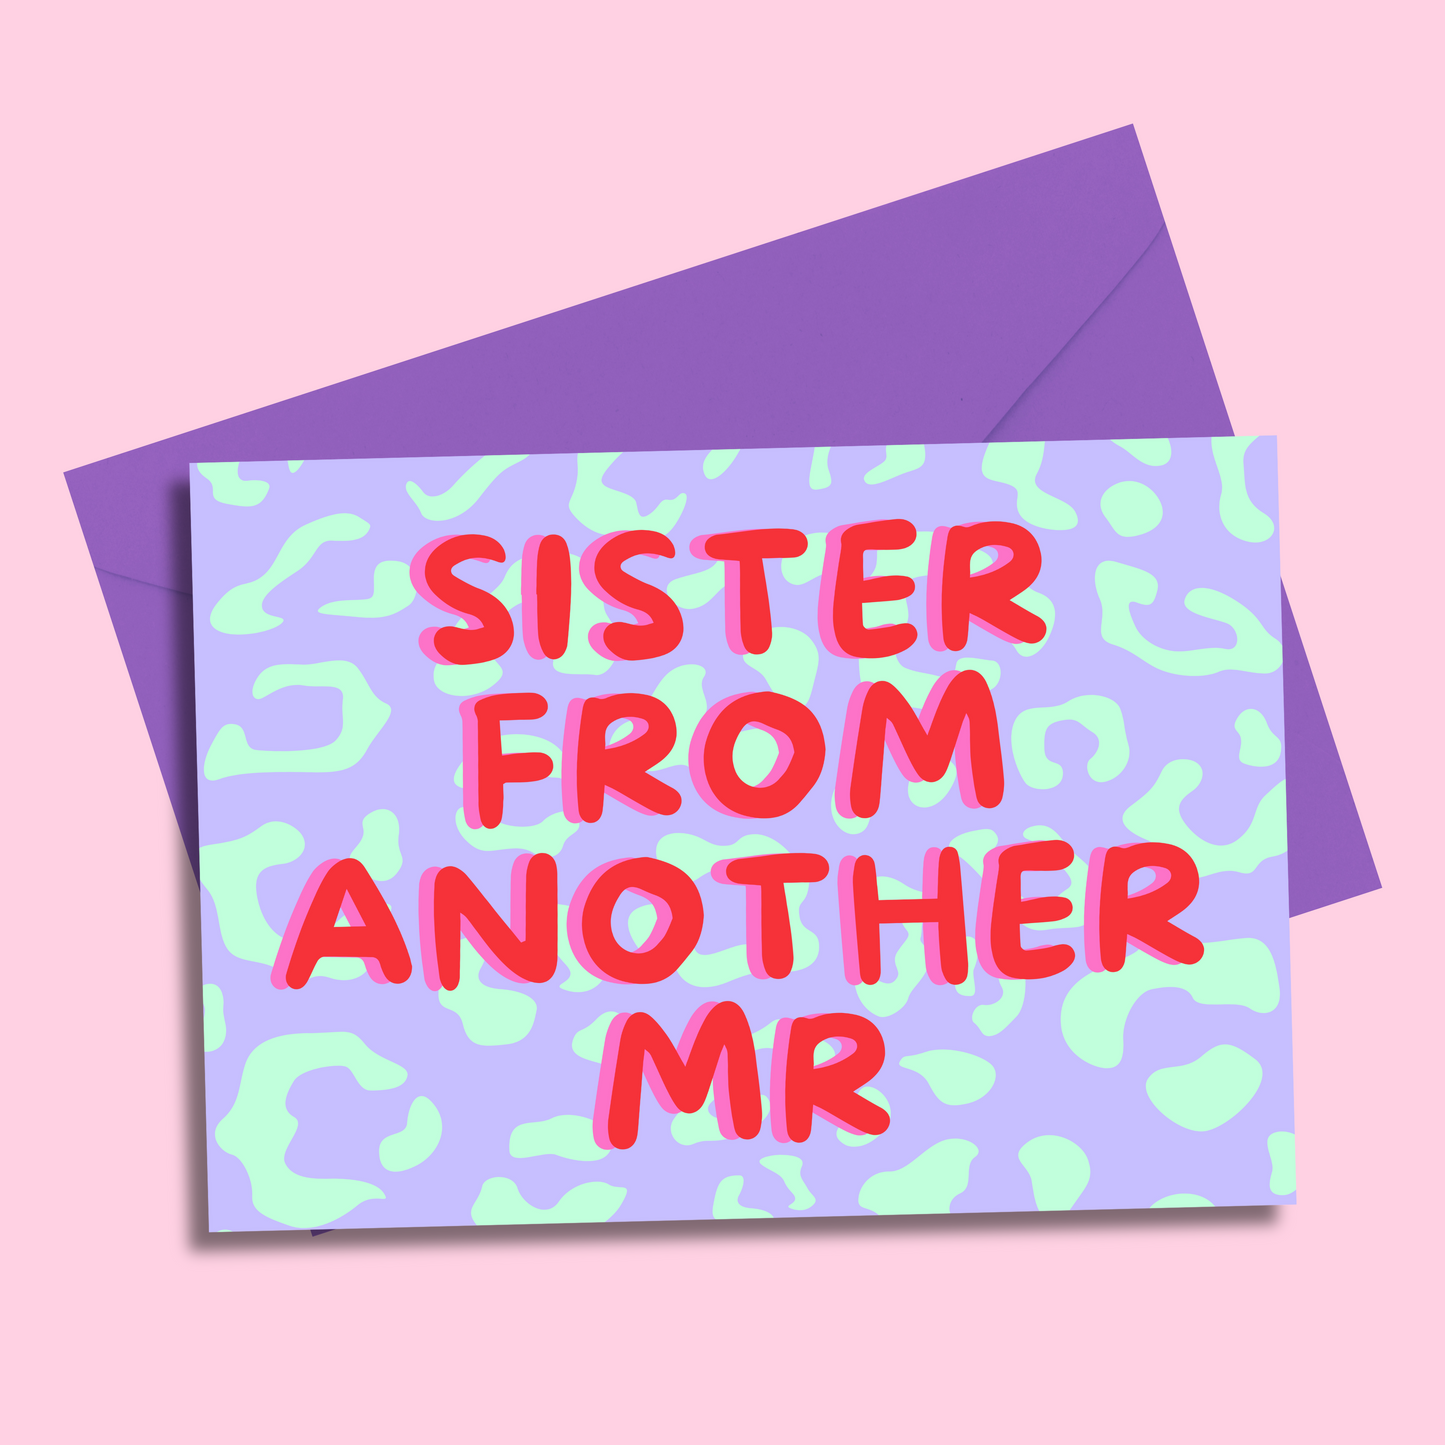 Sister from another Mr (5x7” print/card)